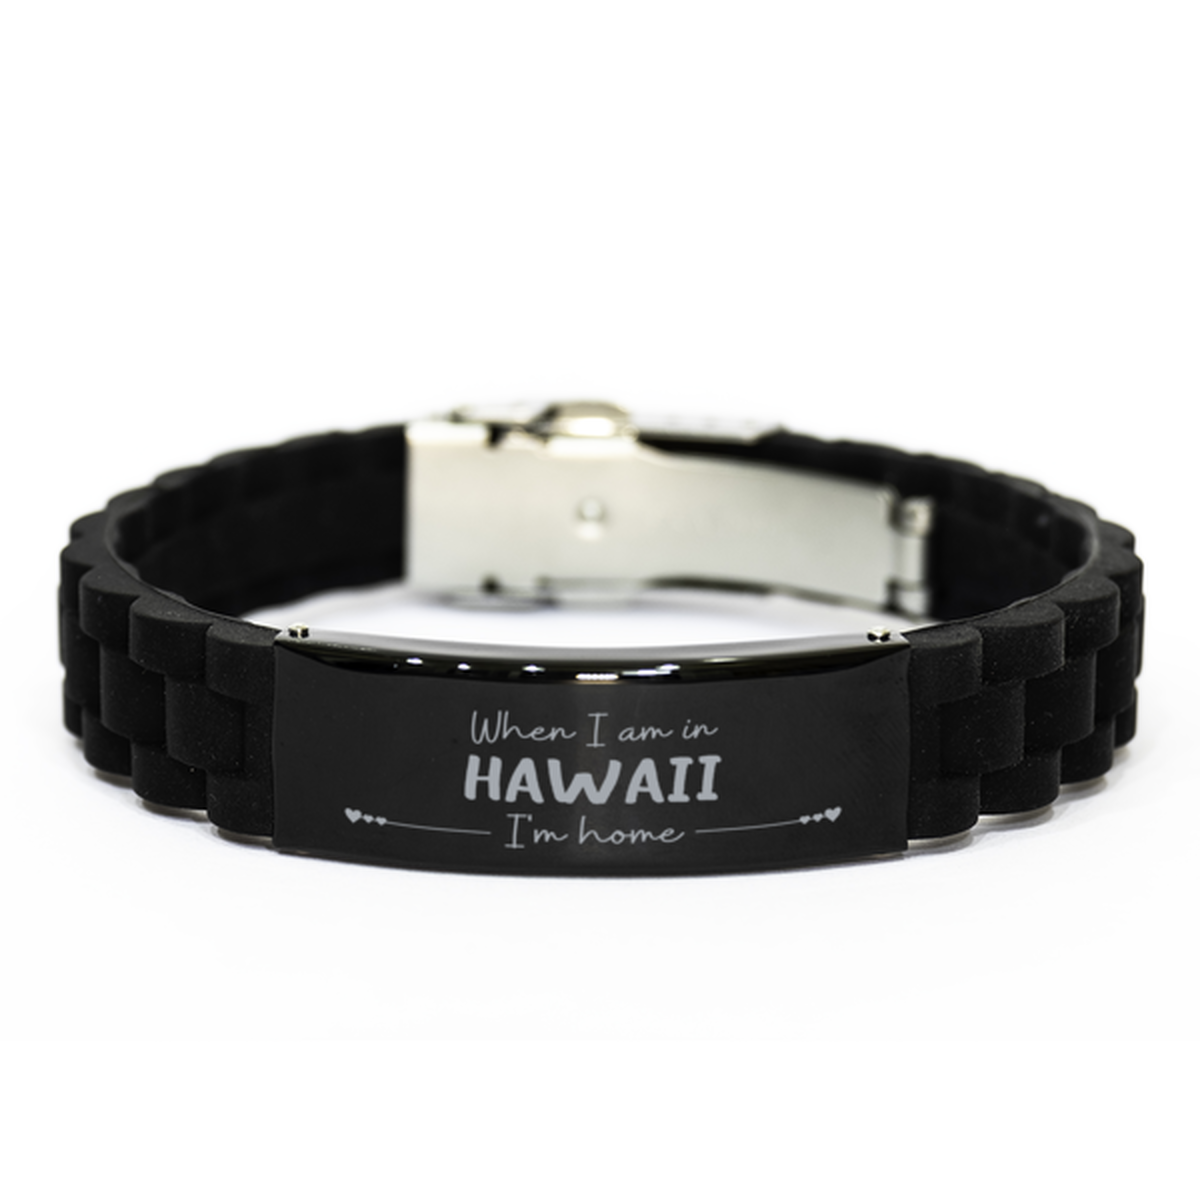 When I am in Hawaii I'm home Black Glidelock Clasp Bracelet, Cheap Gifts For Hawaii, State Hawaii Birthday Gifts for Friends Coworker